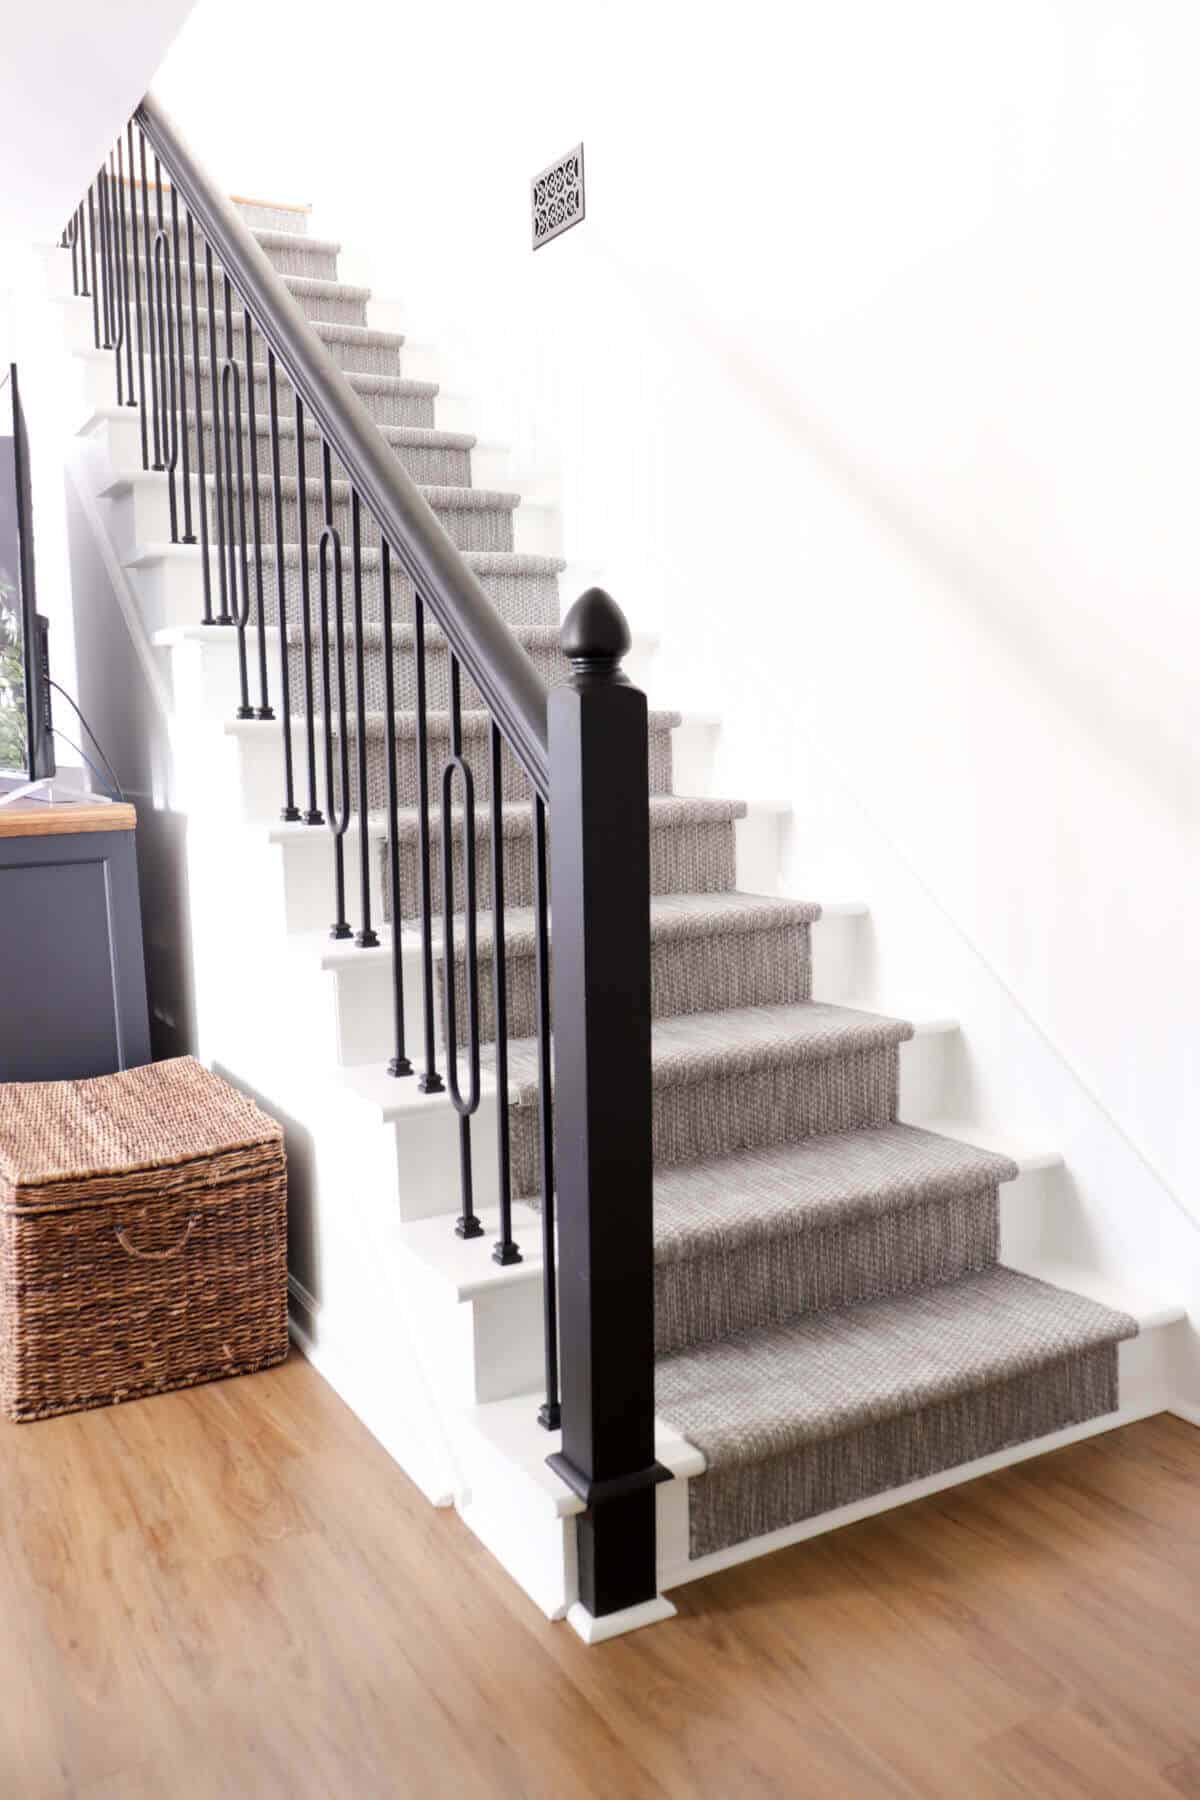 Diy Bat Stair Remodel And How To